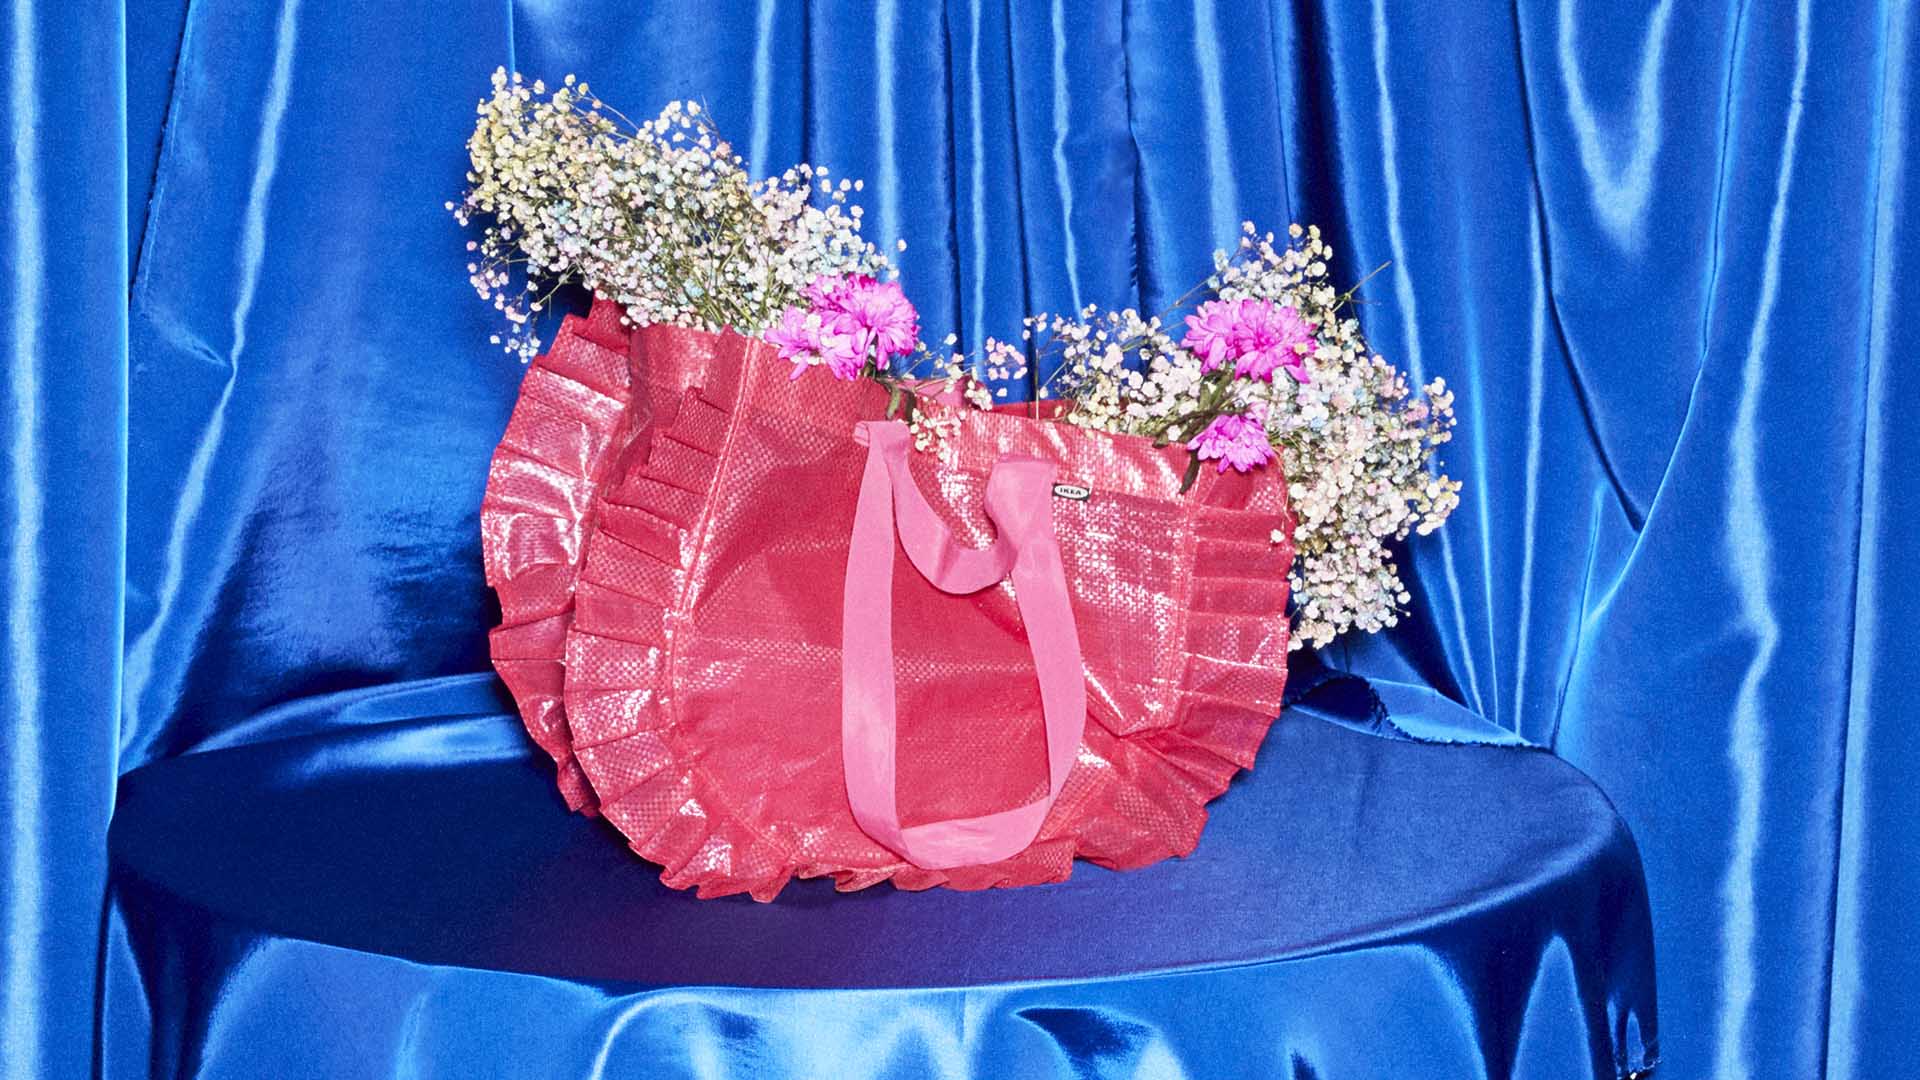 IKEA Is Launching a Pink and Frilly Version of Its Famed (and Super Handy) Frakta Bag